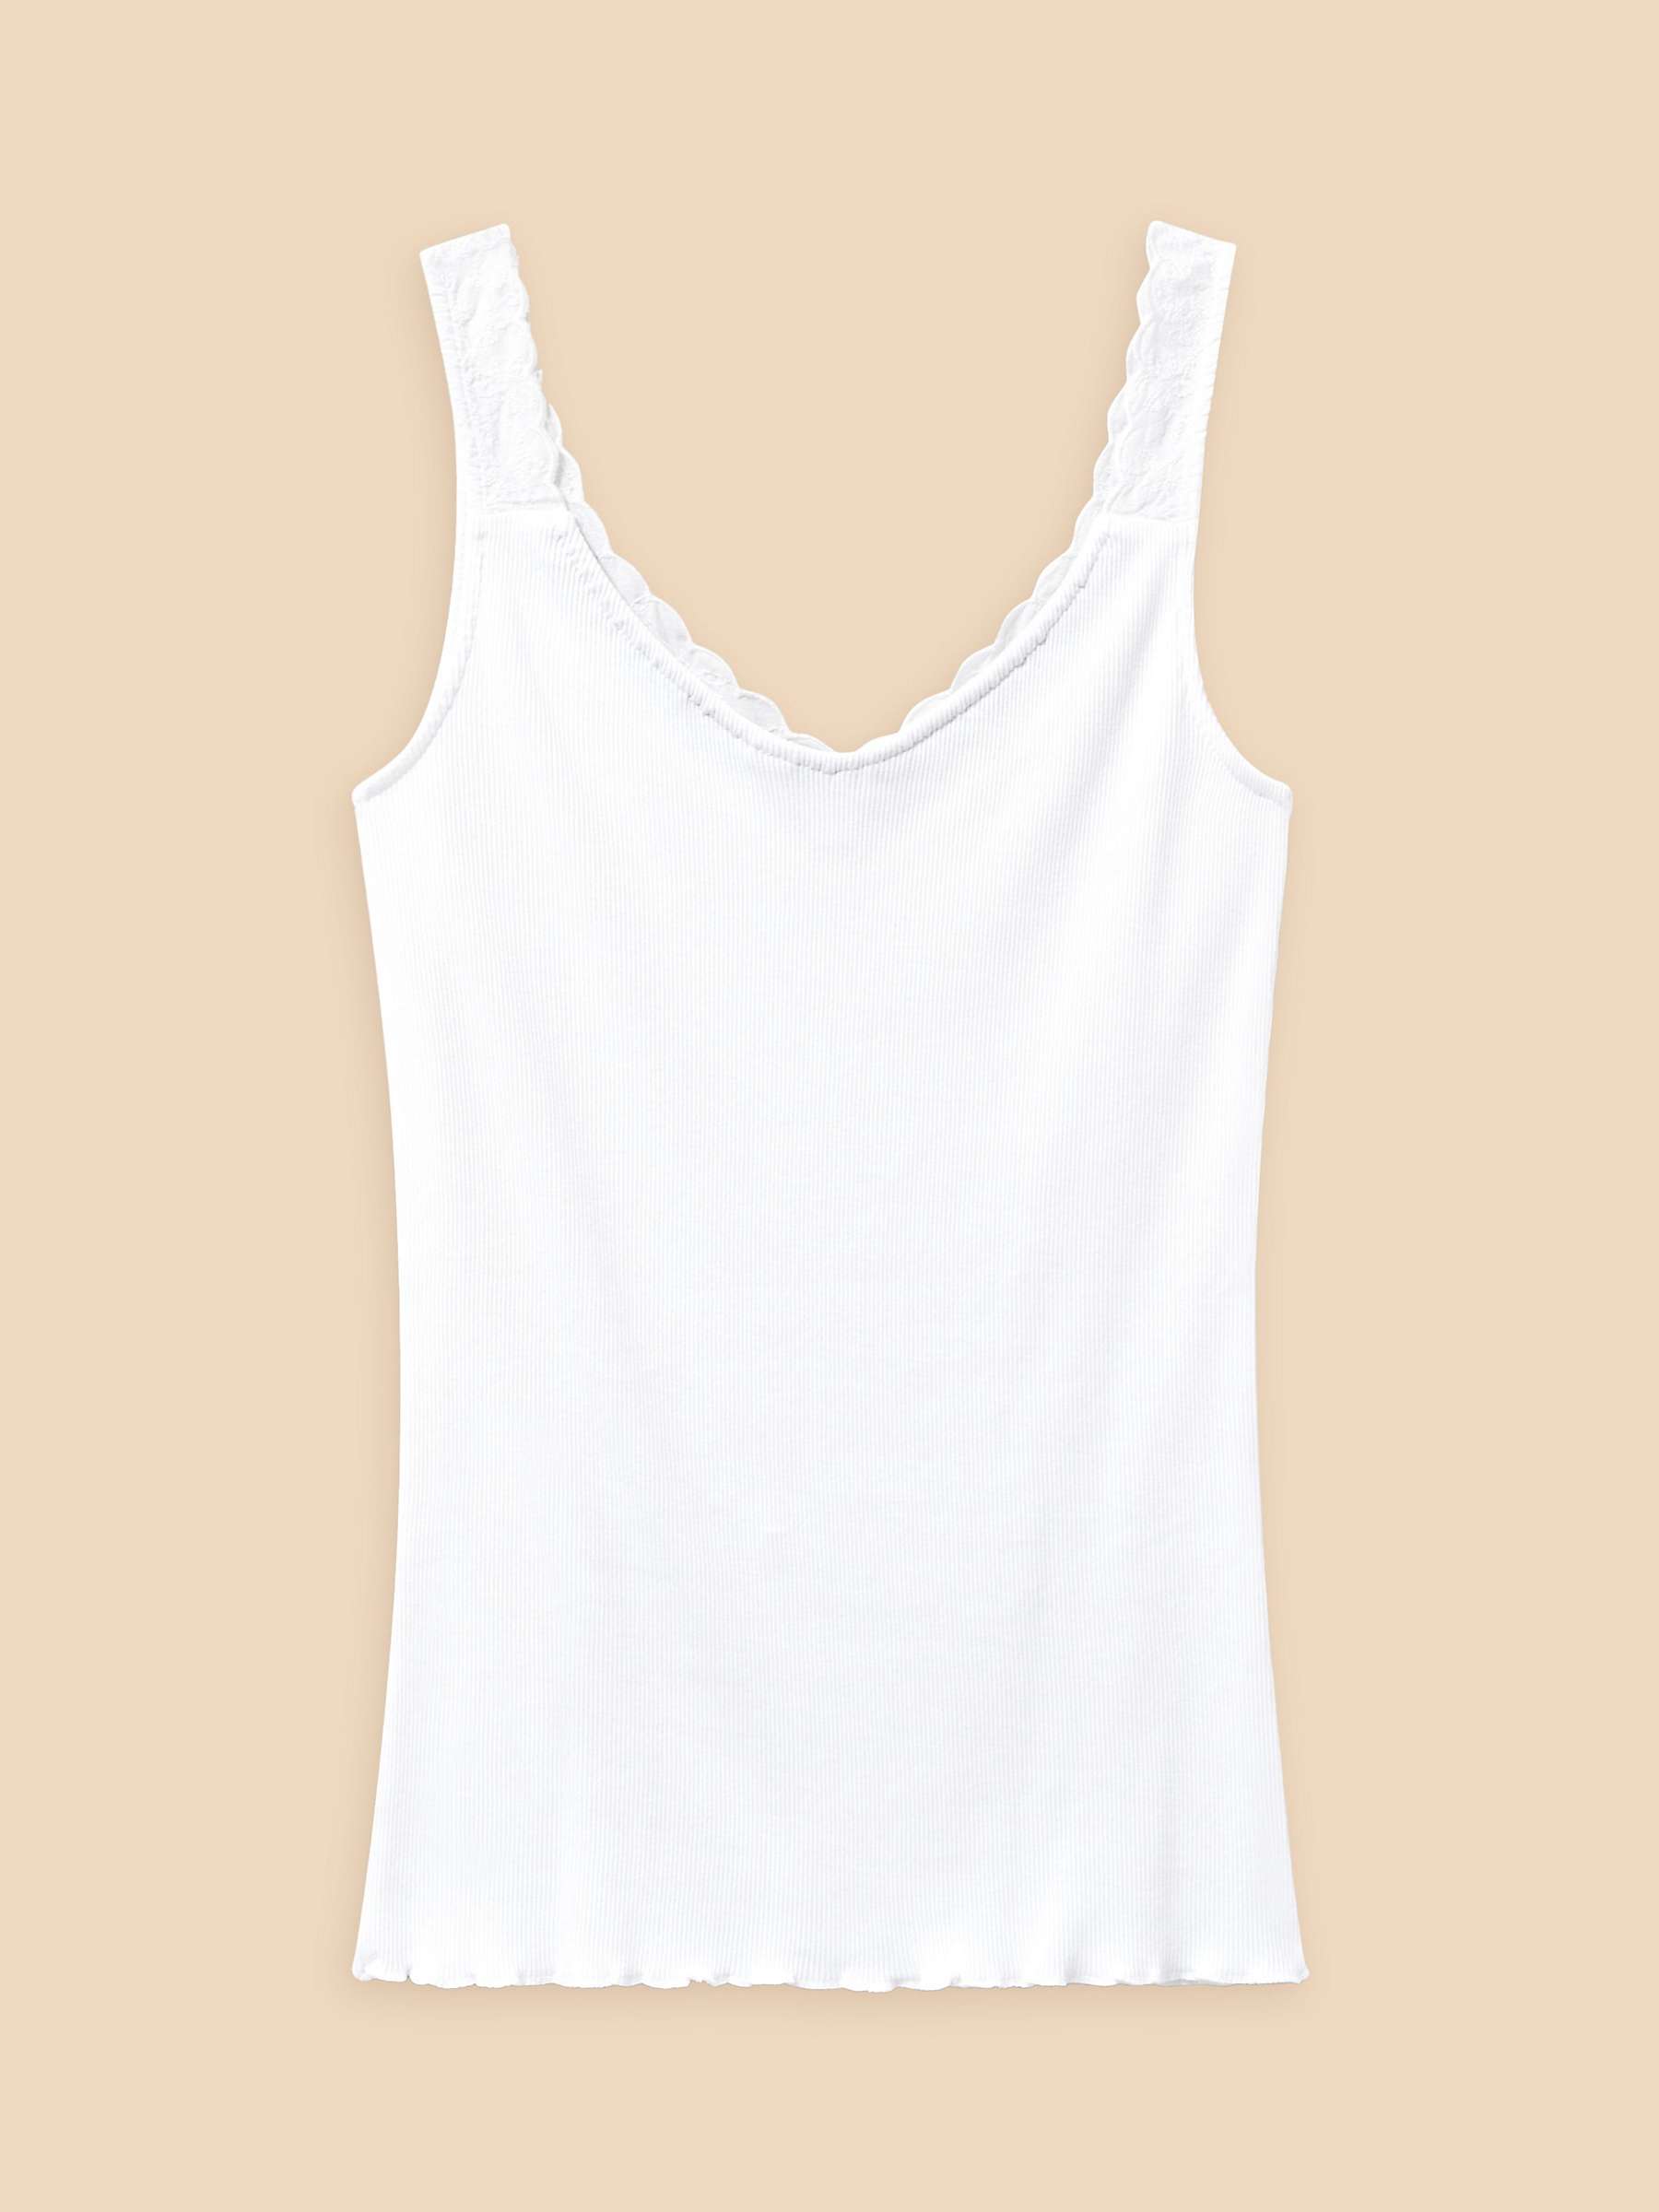 Buy White Stuff Seabreeze Embroidered Vest Online at johnlewis.com